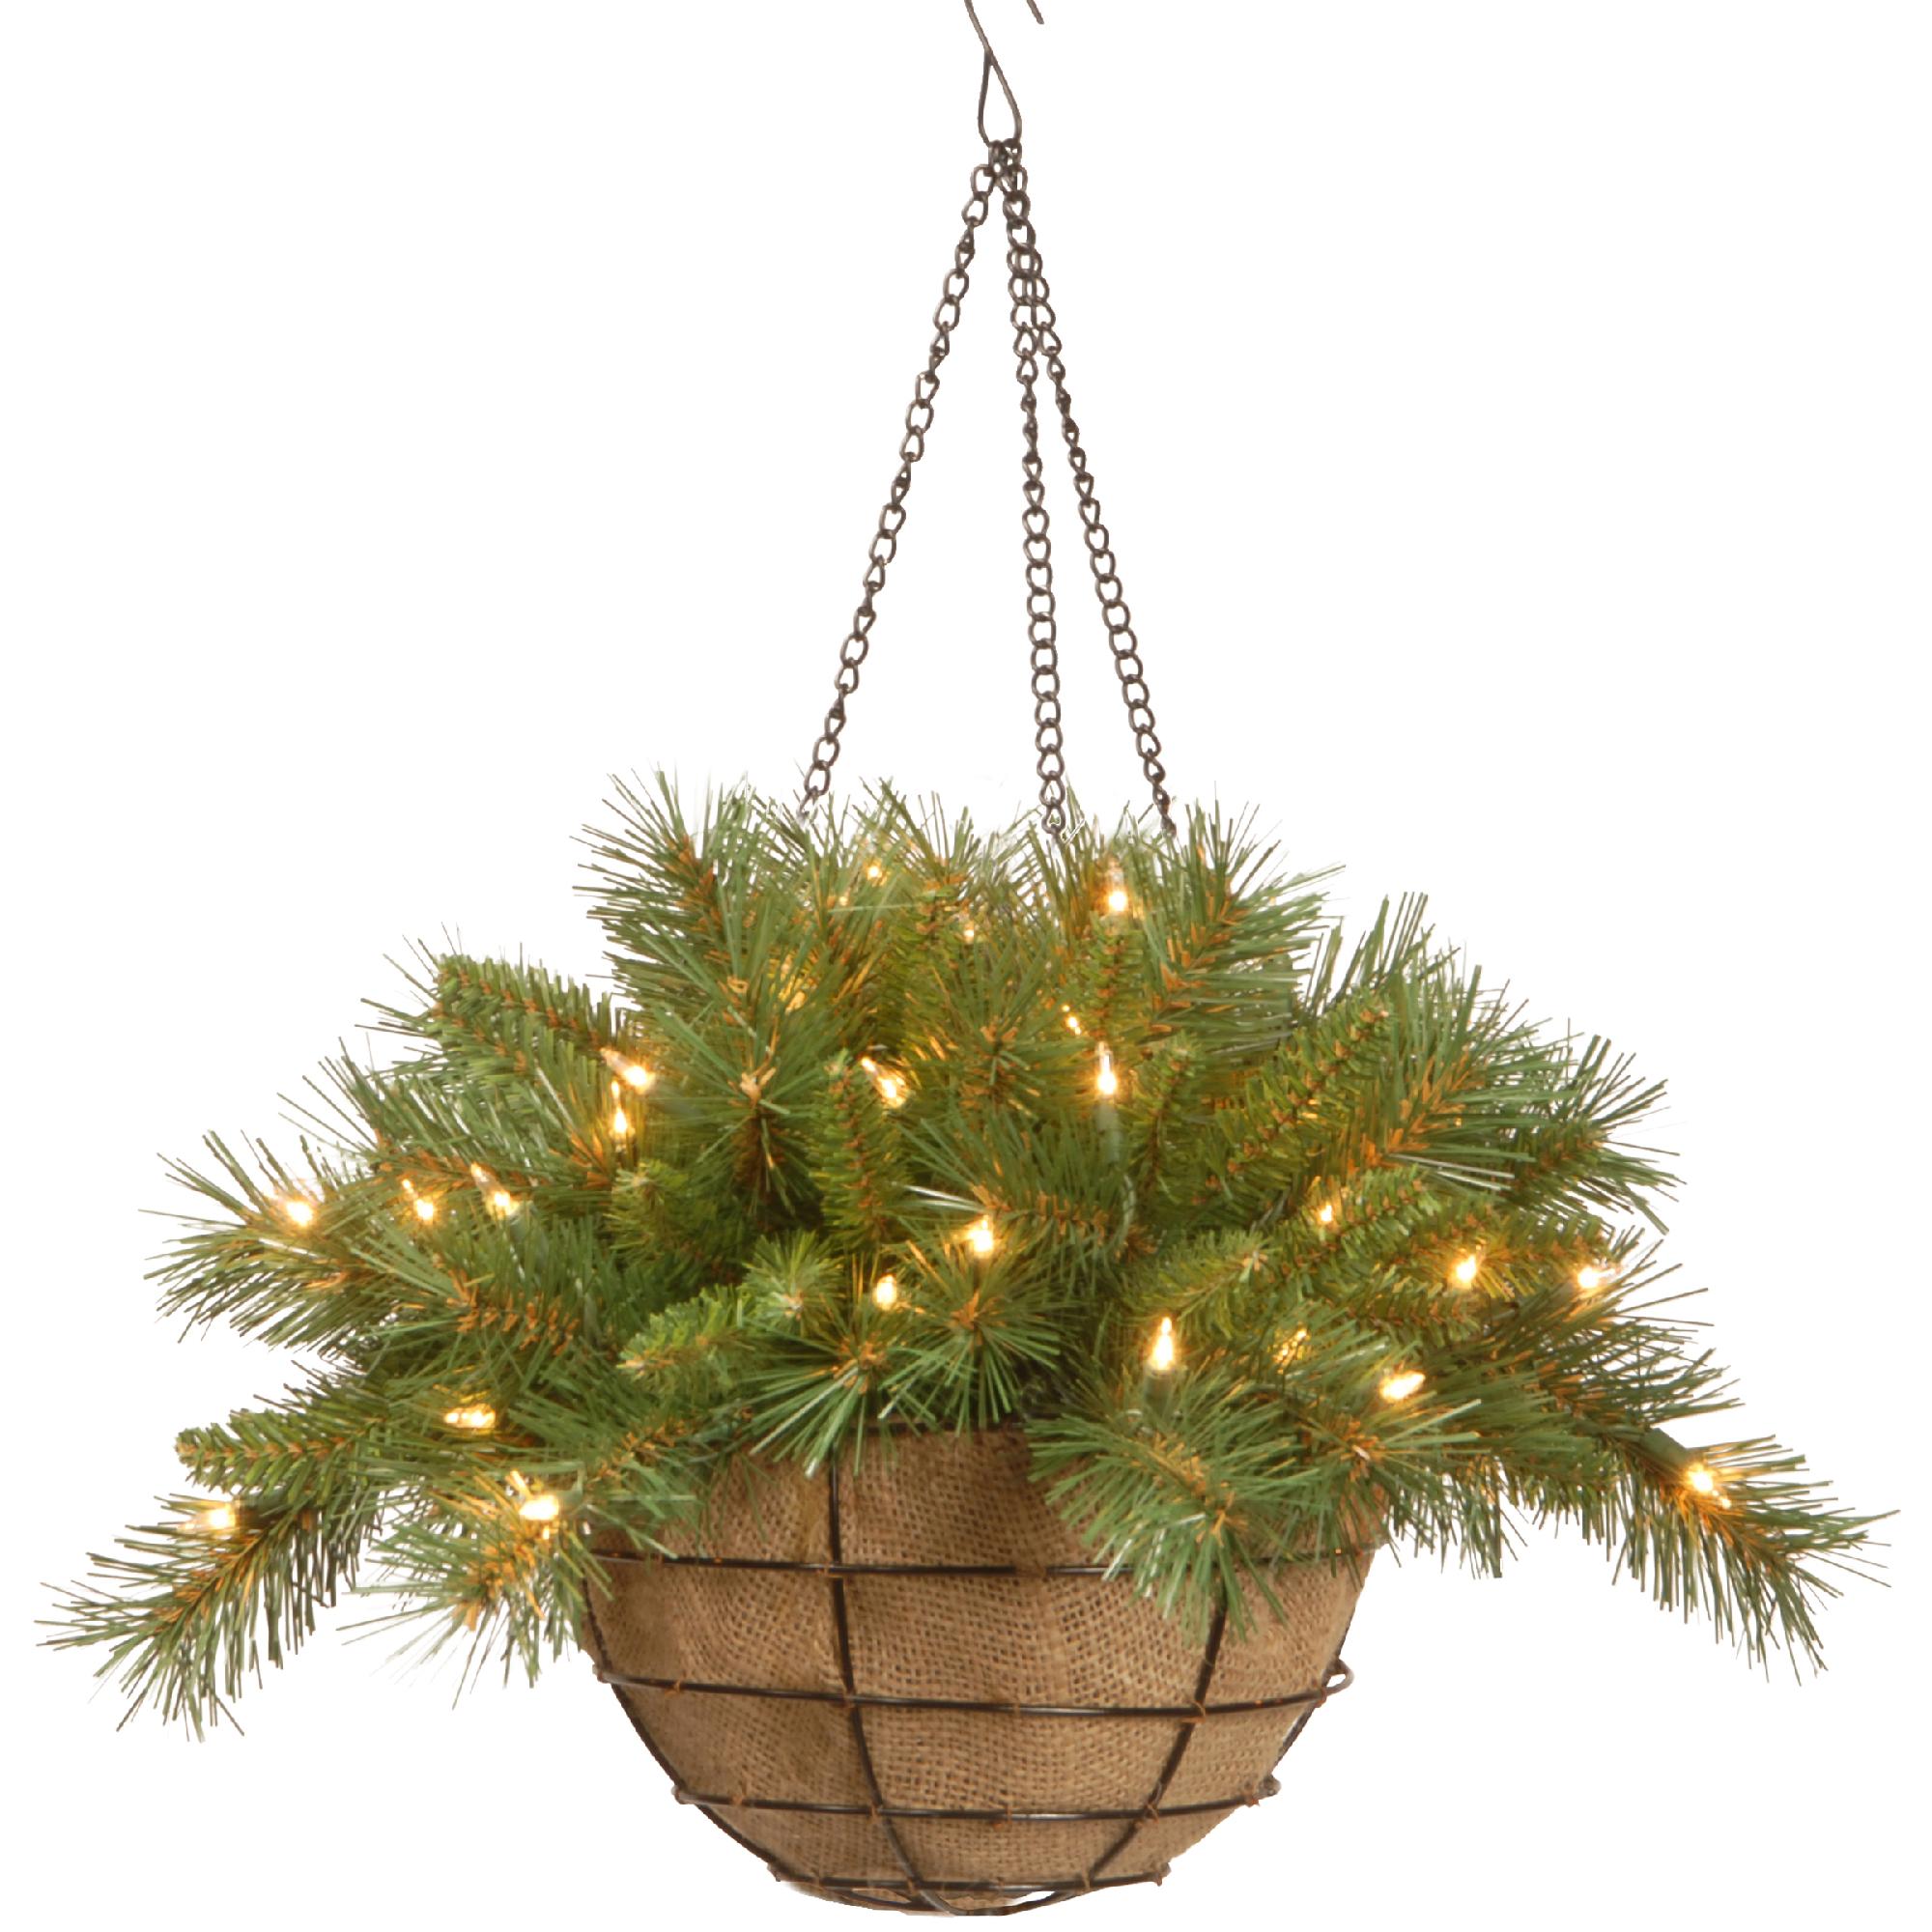 National Tree Company 20" Tiffany Fir Hanging Basket with Battery Operated Warm White LED Lights